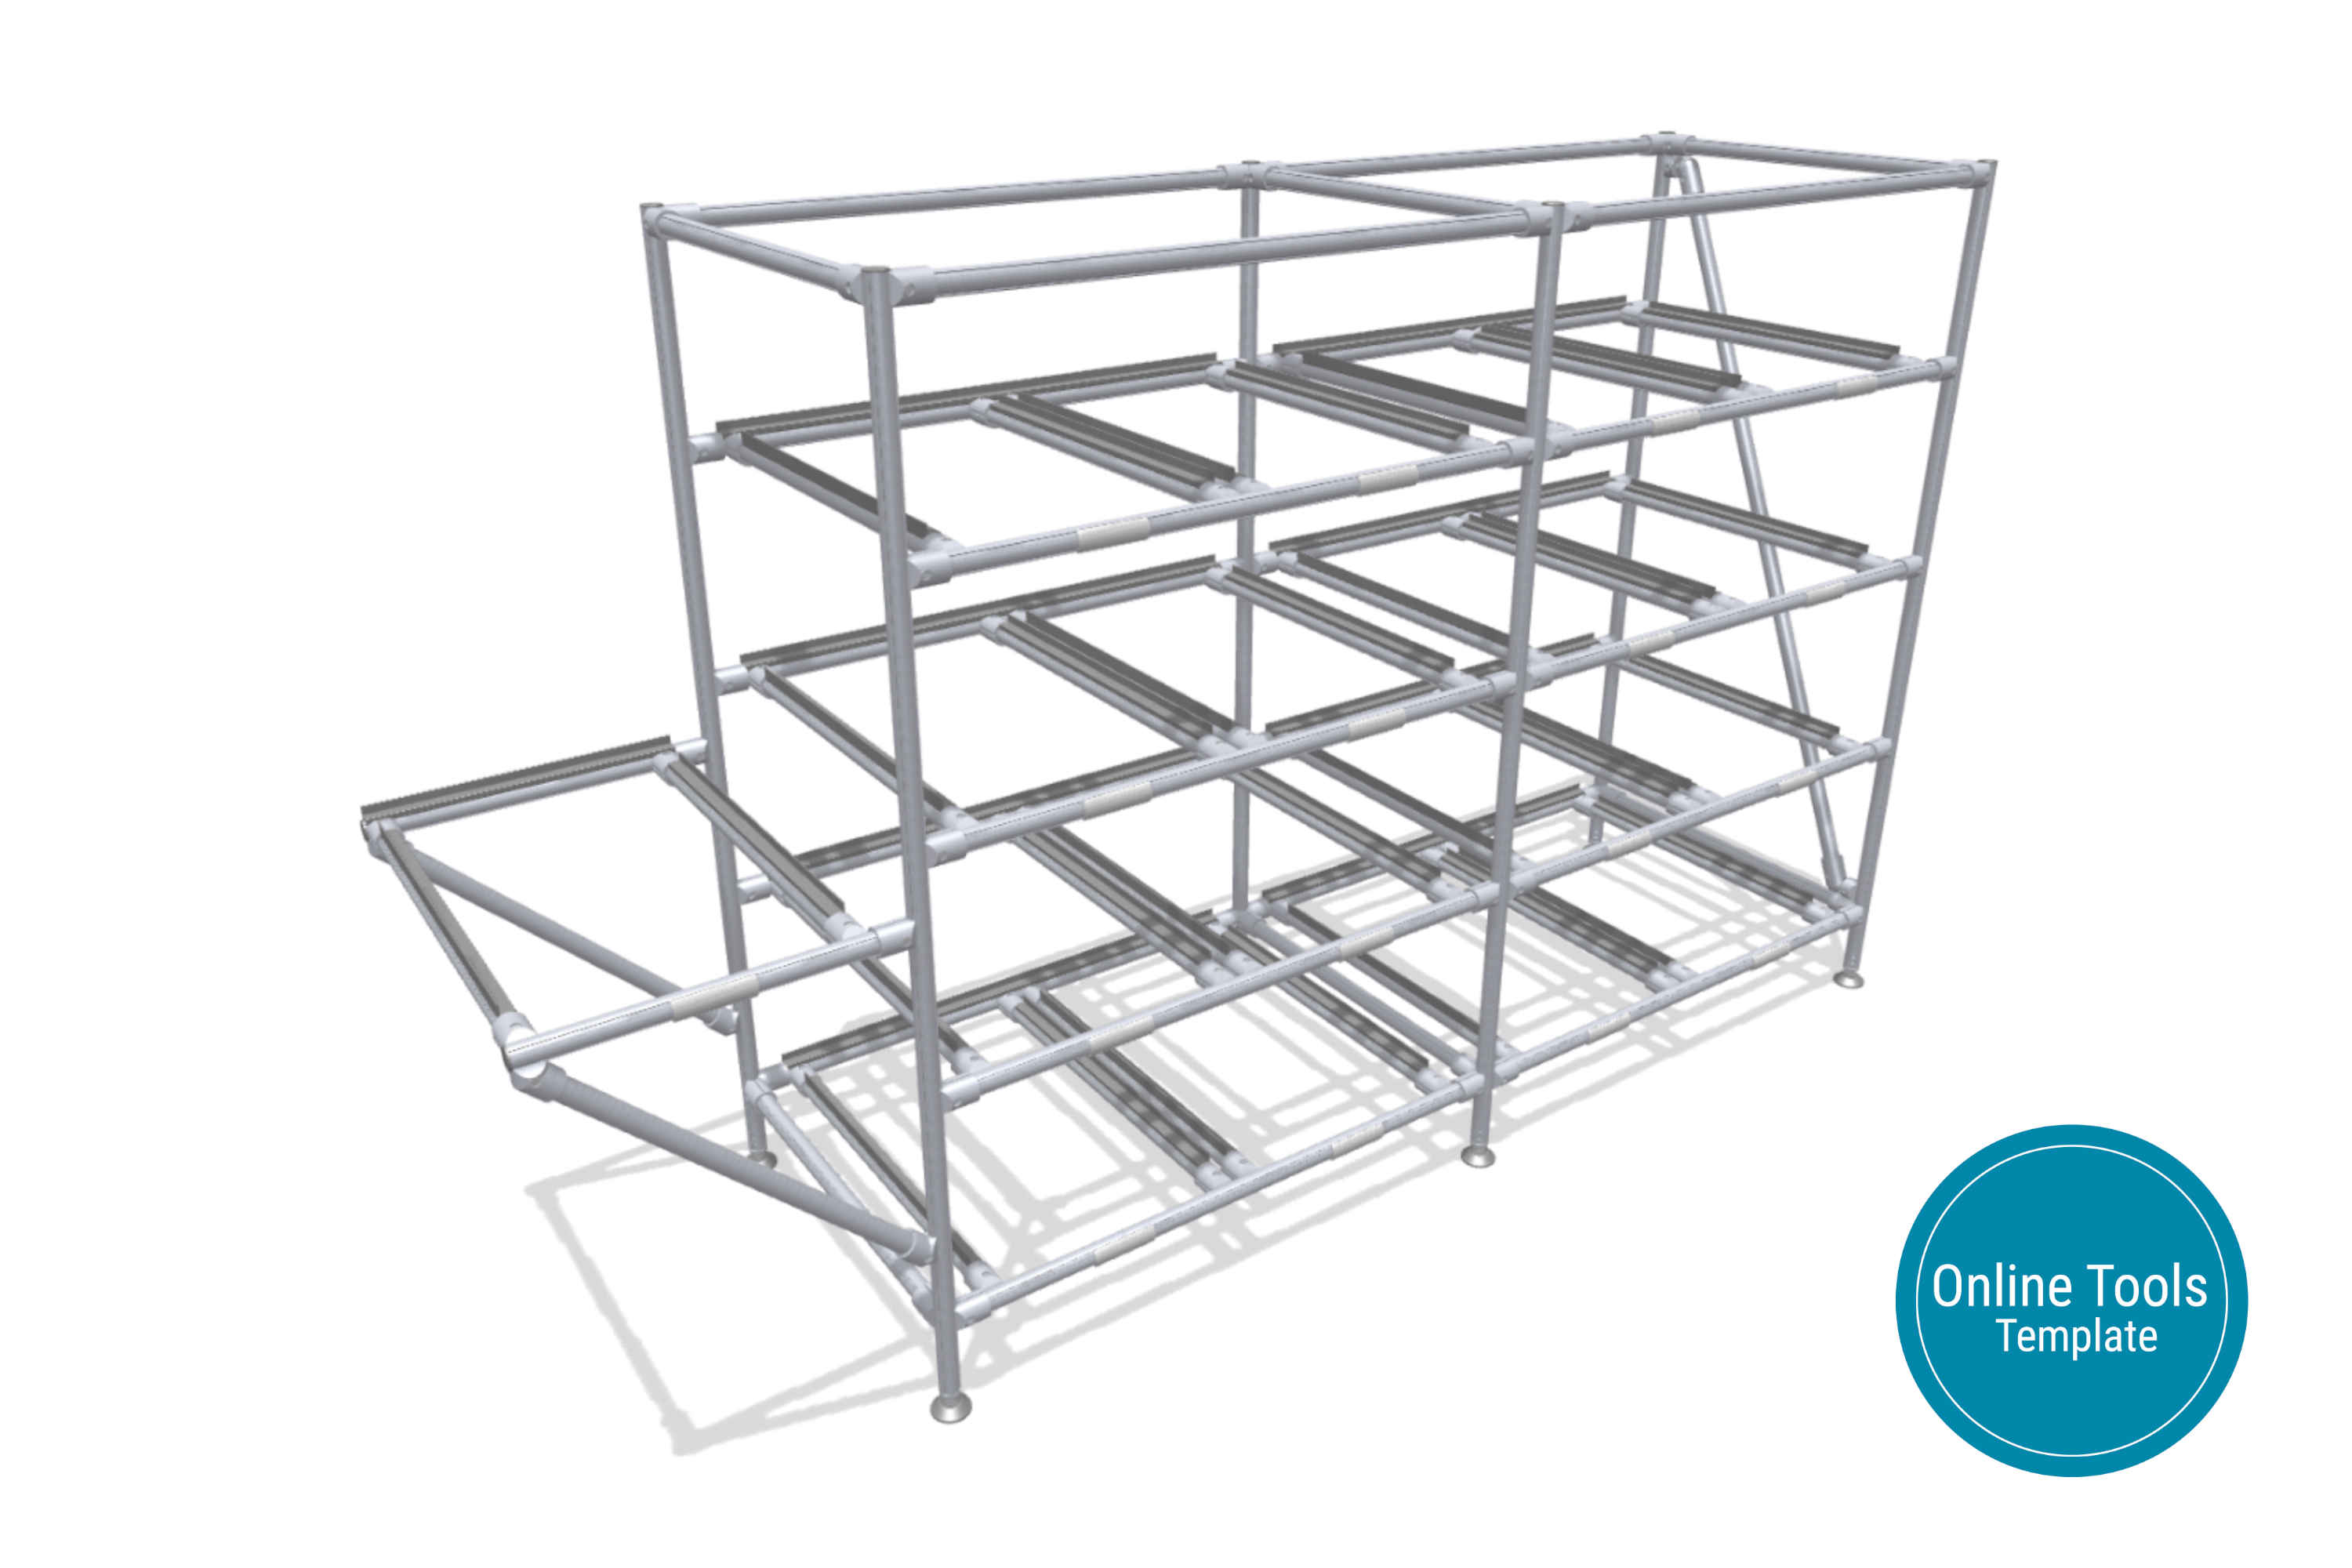 Lean production rack for small load carriers